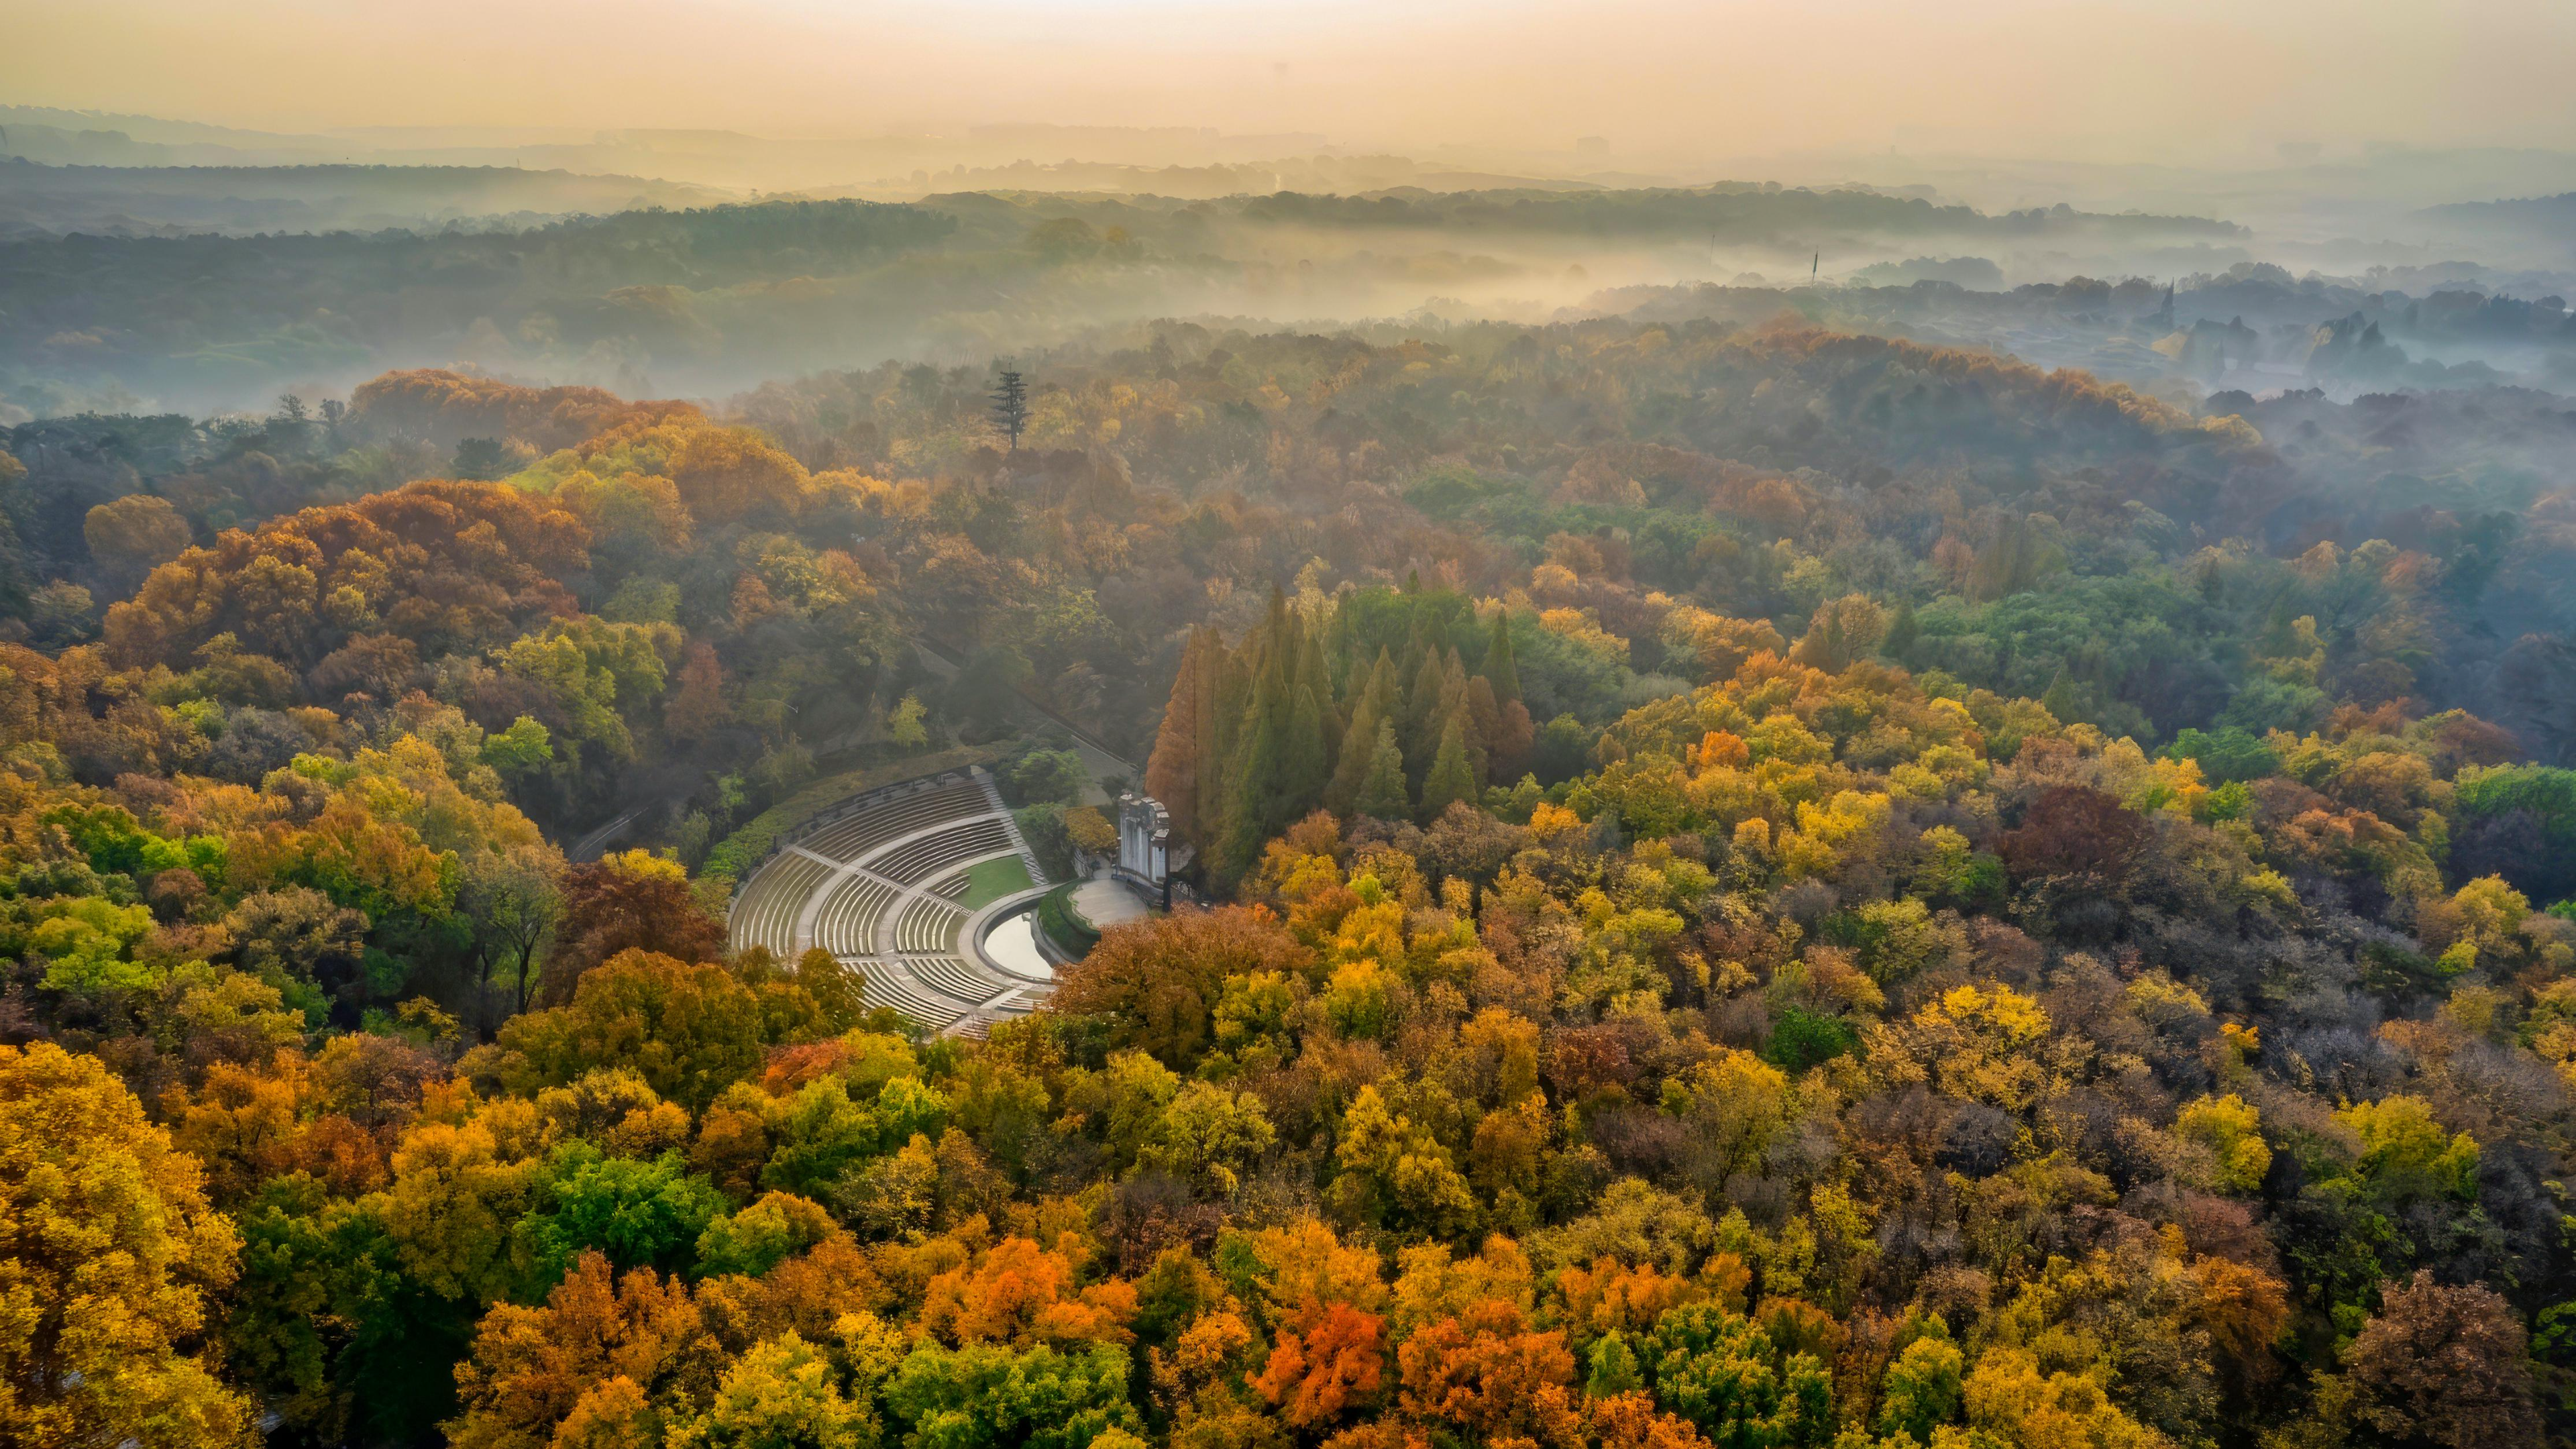 General 3840x2160 nature landscape trees forest architecture mist far view fall Nanjing China amphitheater